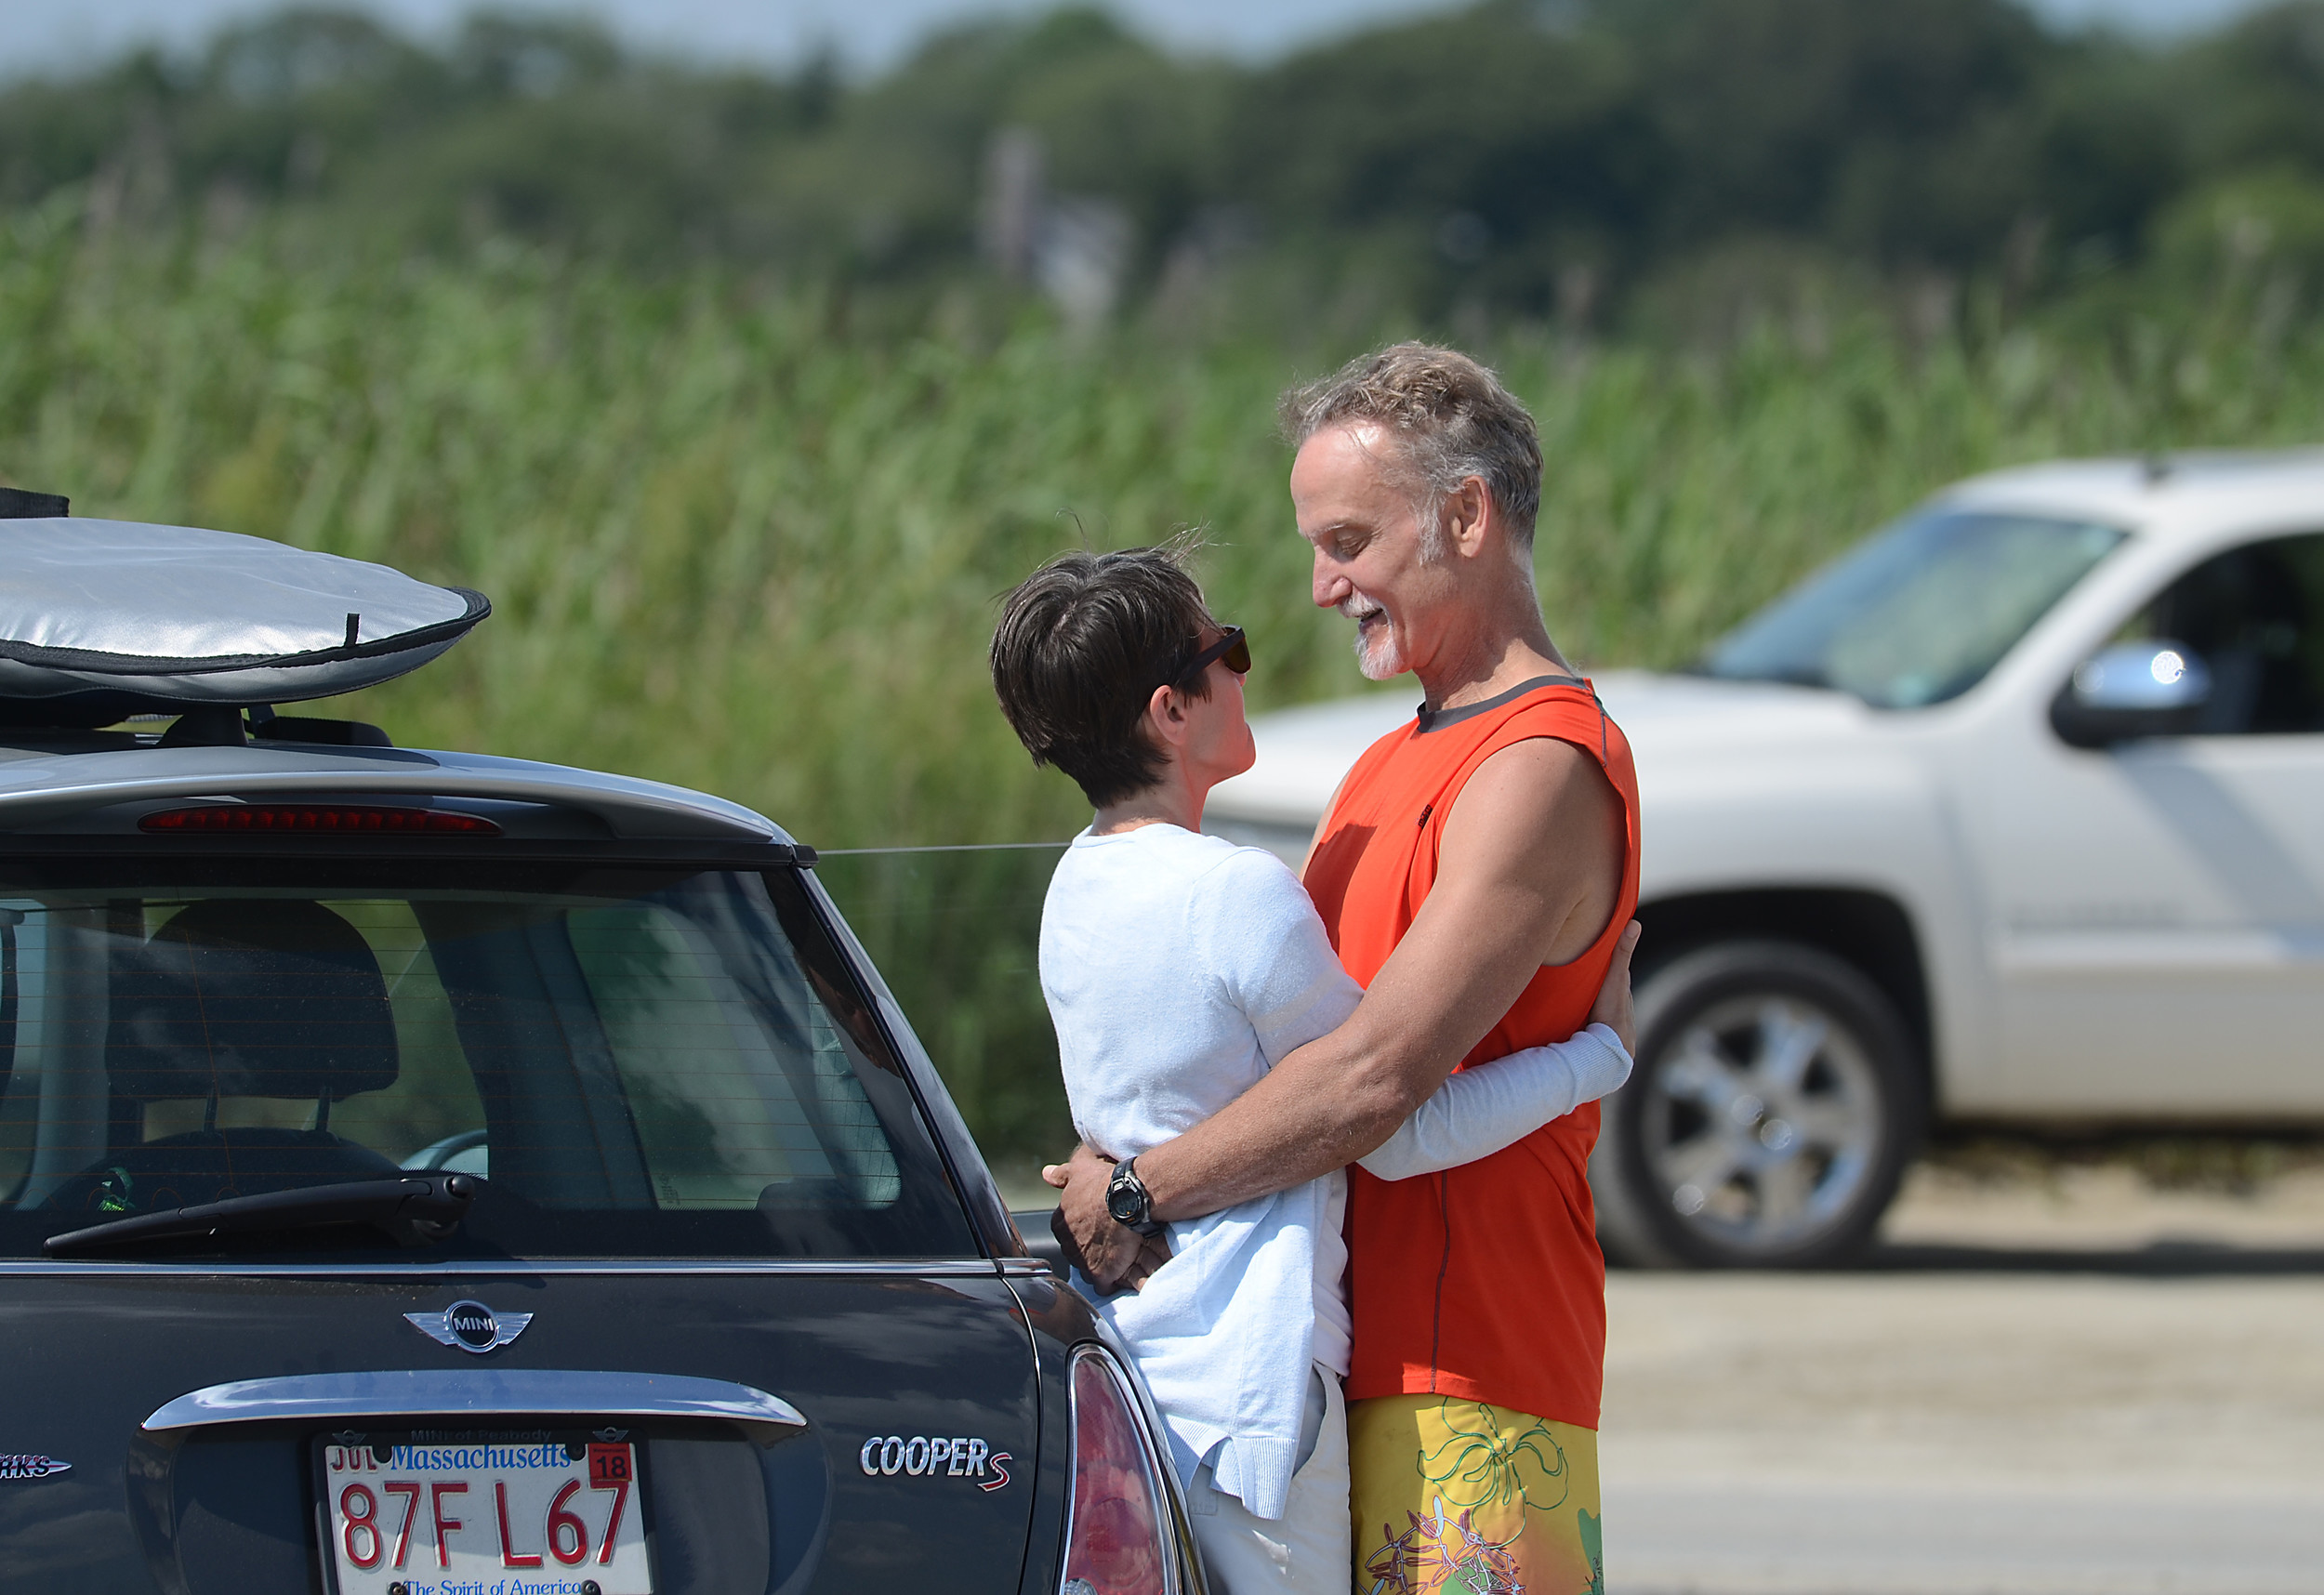 A couple enjoys the afternoon as cars line up to leave the beach.